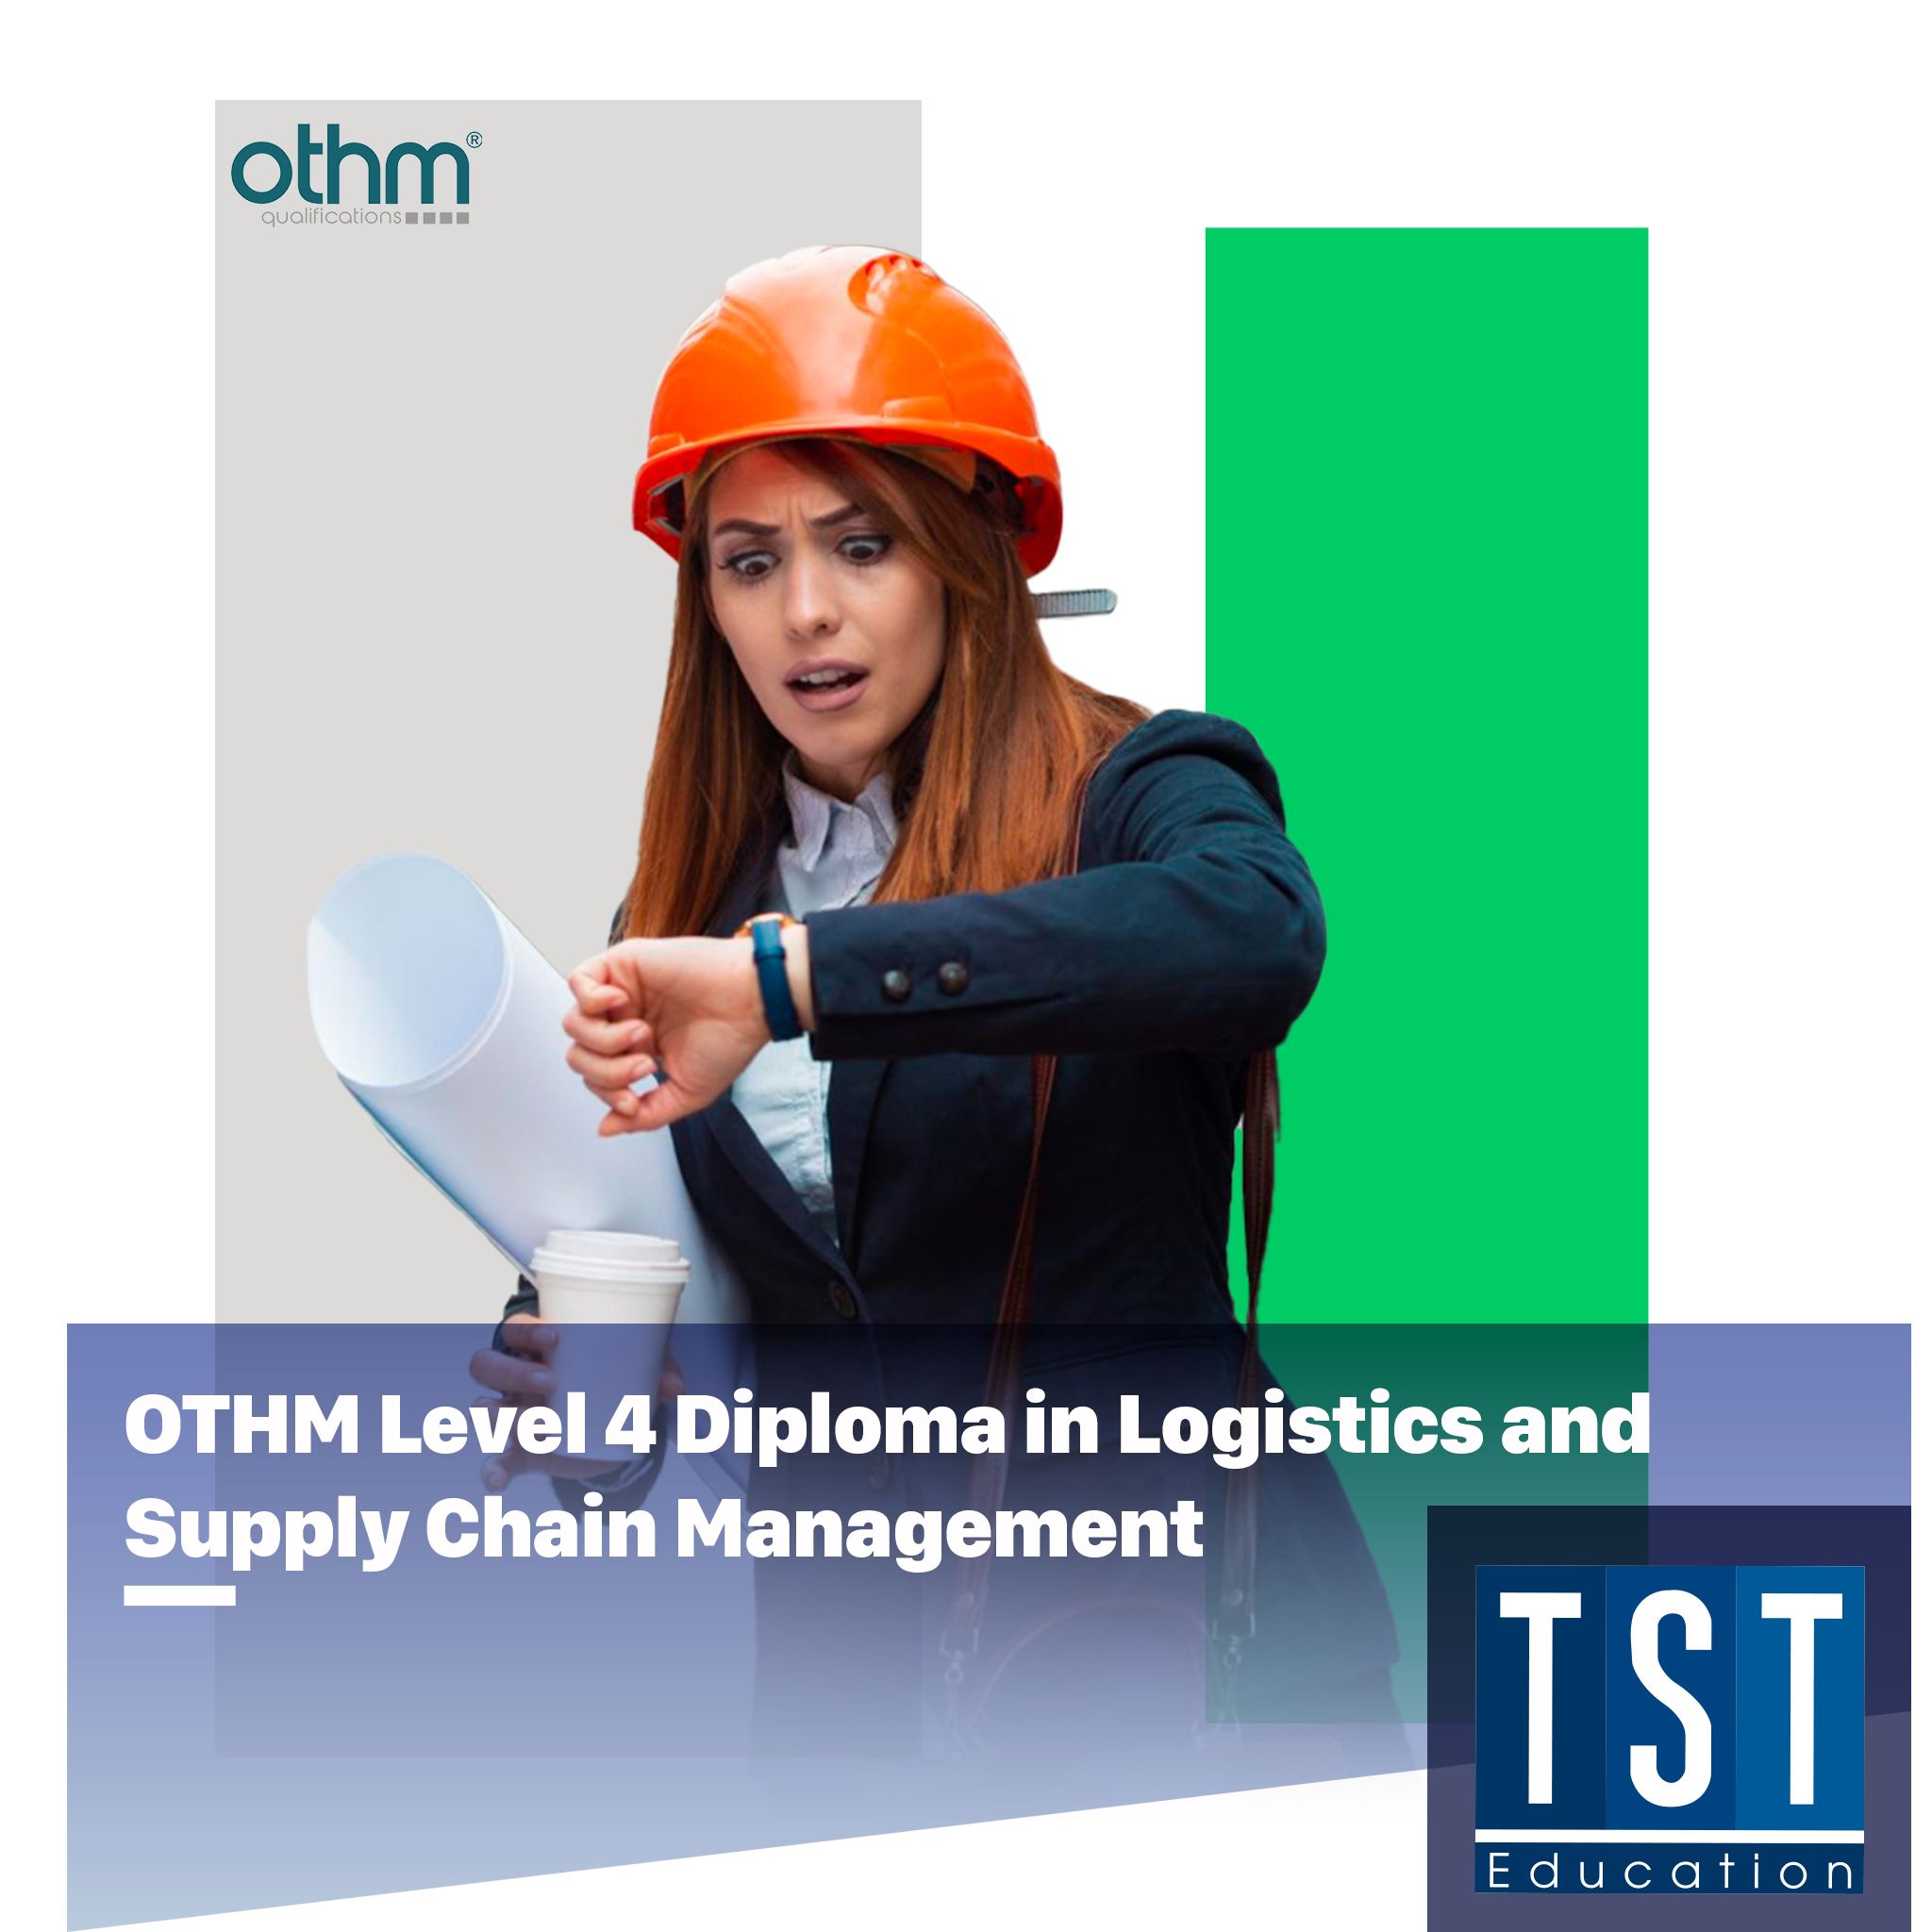  OTHM Level 4 Diploma in Logistics and Supply Chain Management 